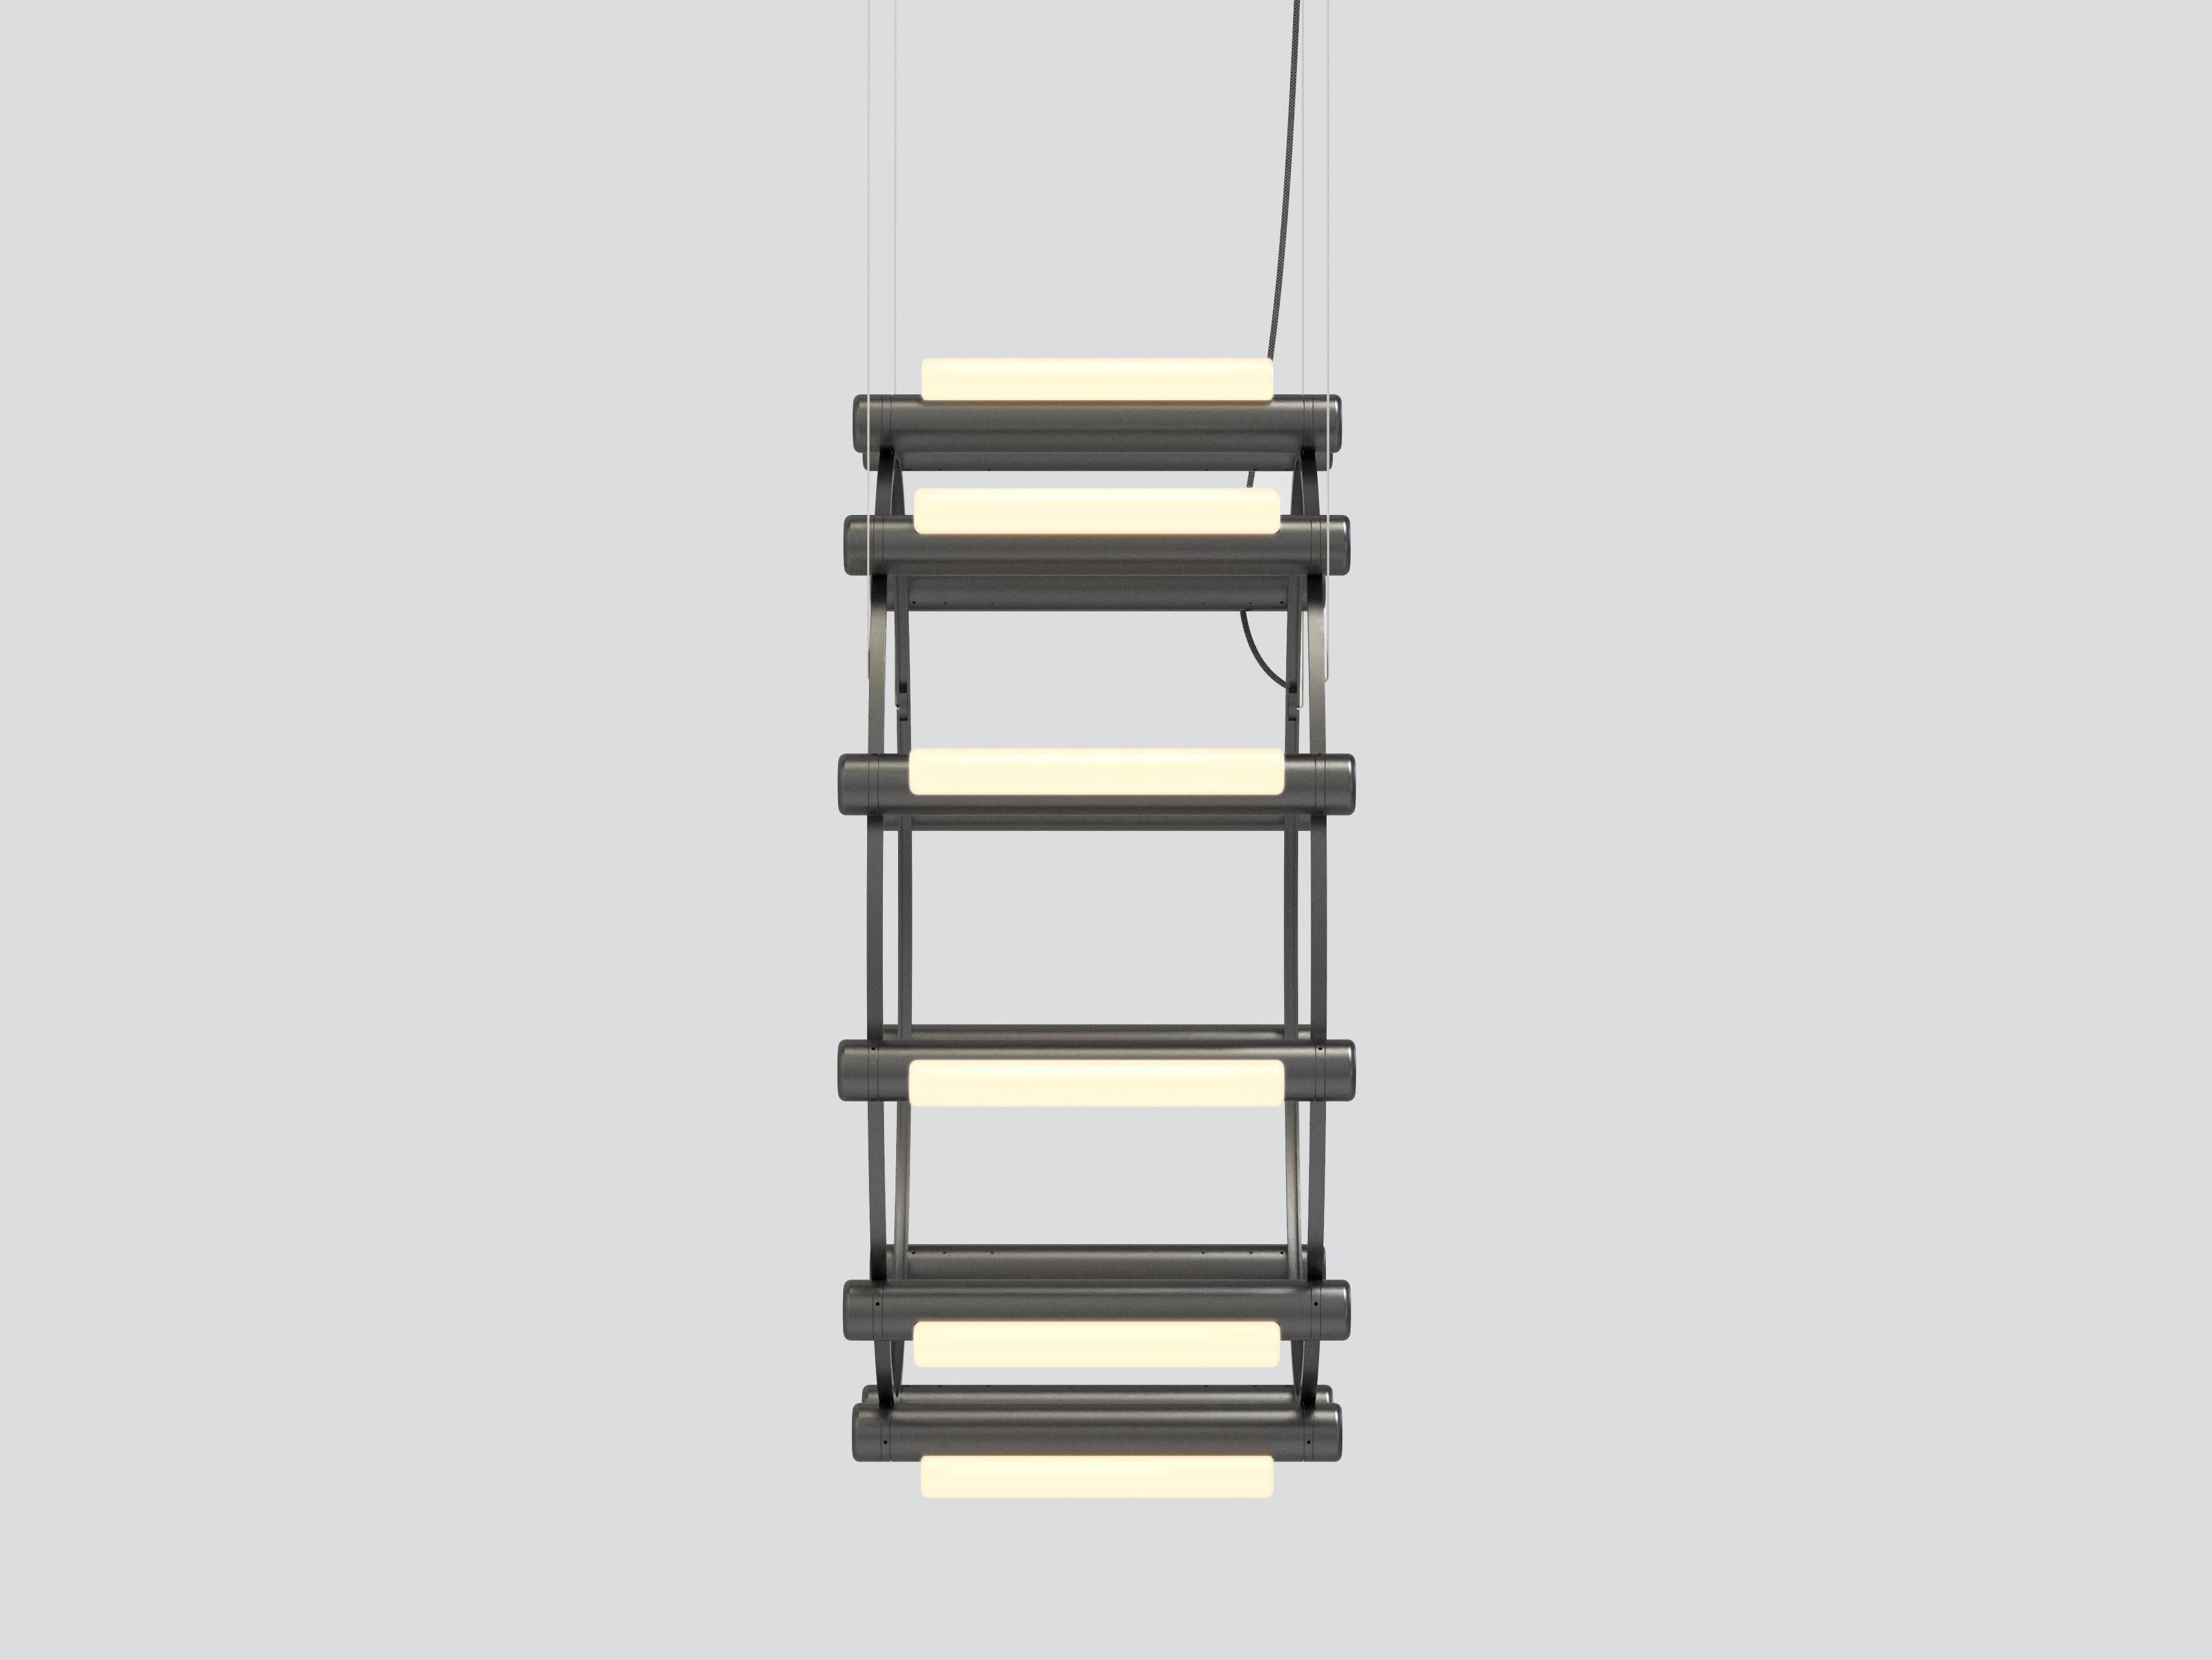 Pipeline chandelier 3
Design: Caine Heintzman, Editor: AND Light

By definition, the Pipeline Chandelier features a cylindrical arrangement of linear illuminated sections cinched by metal hoops. Its carousel like form proposes an unconventional